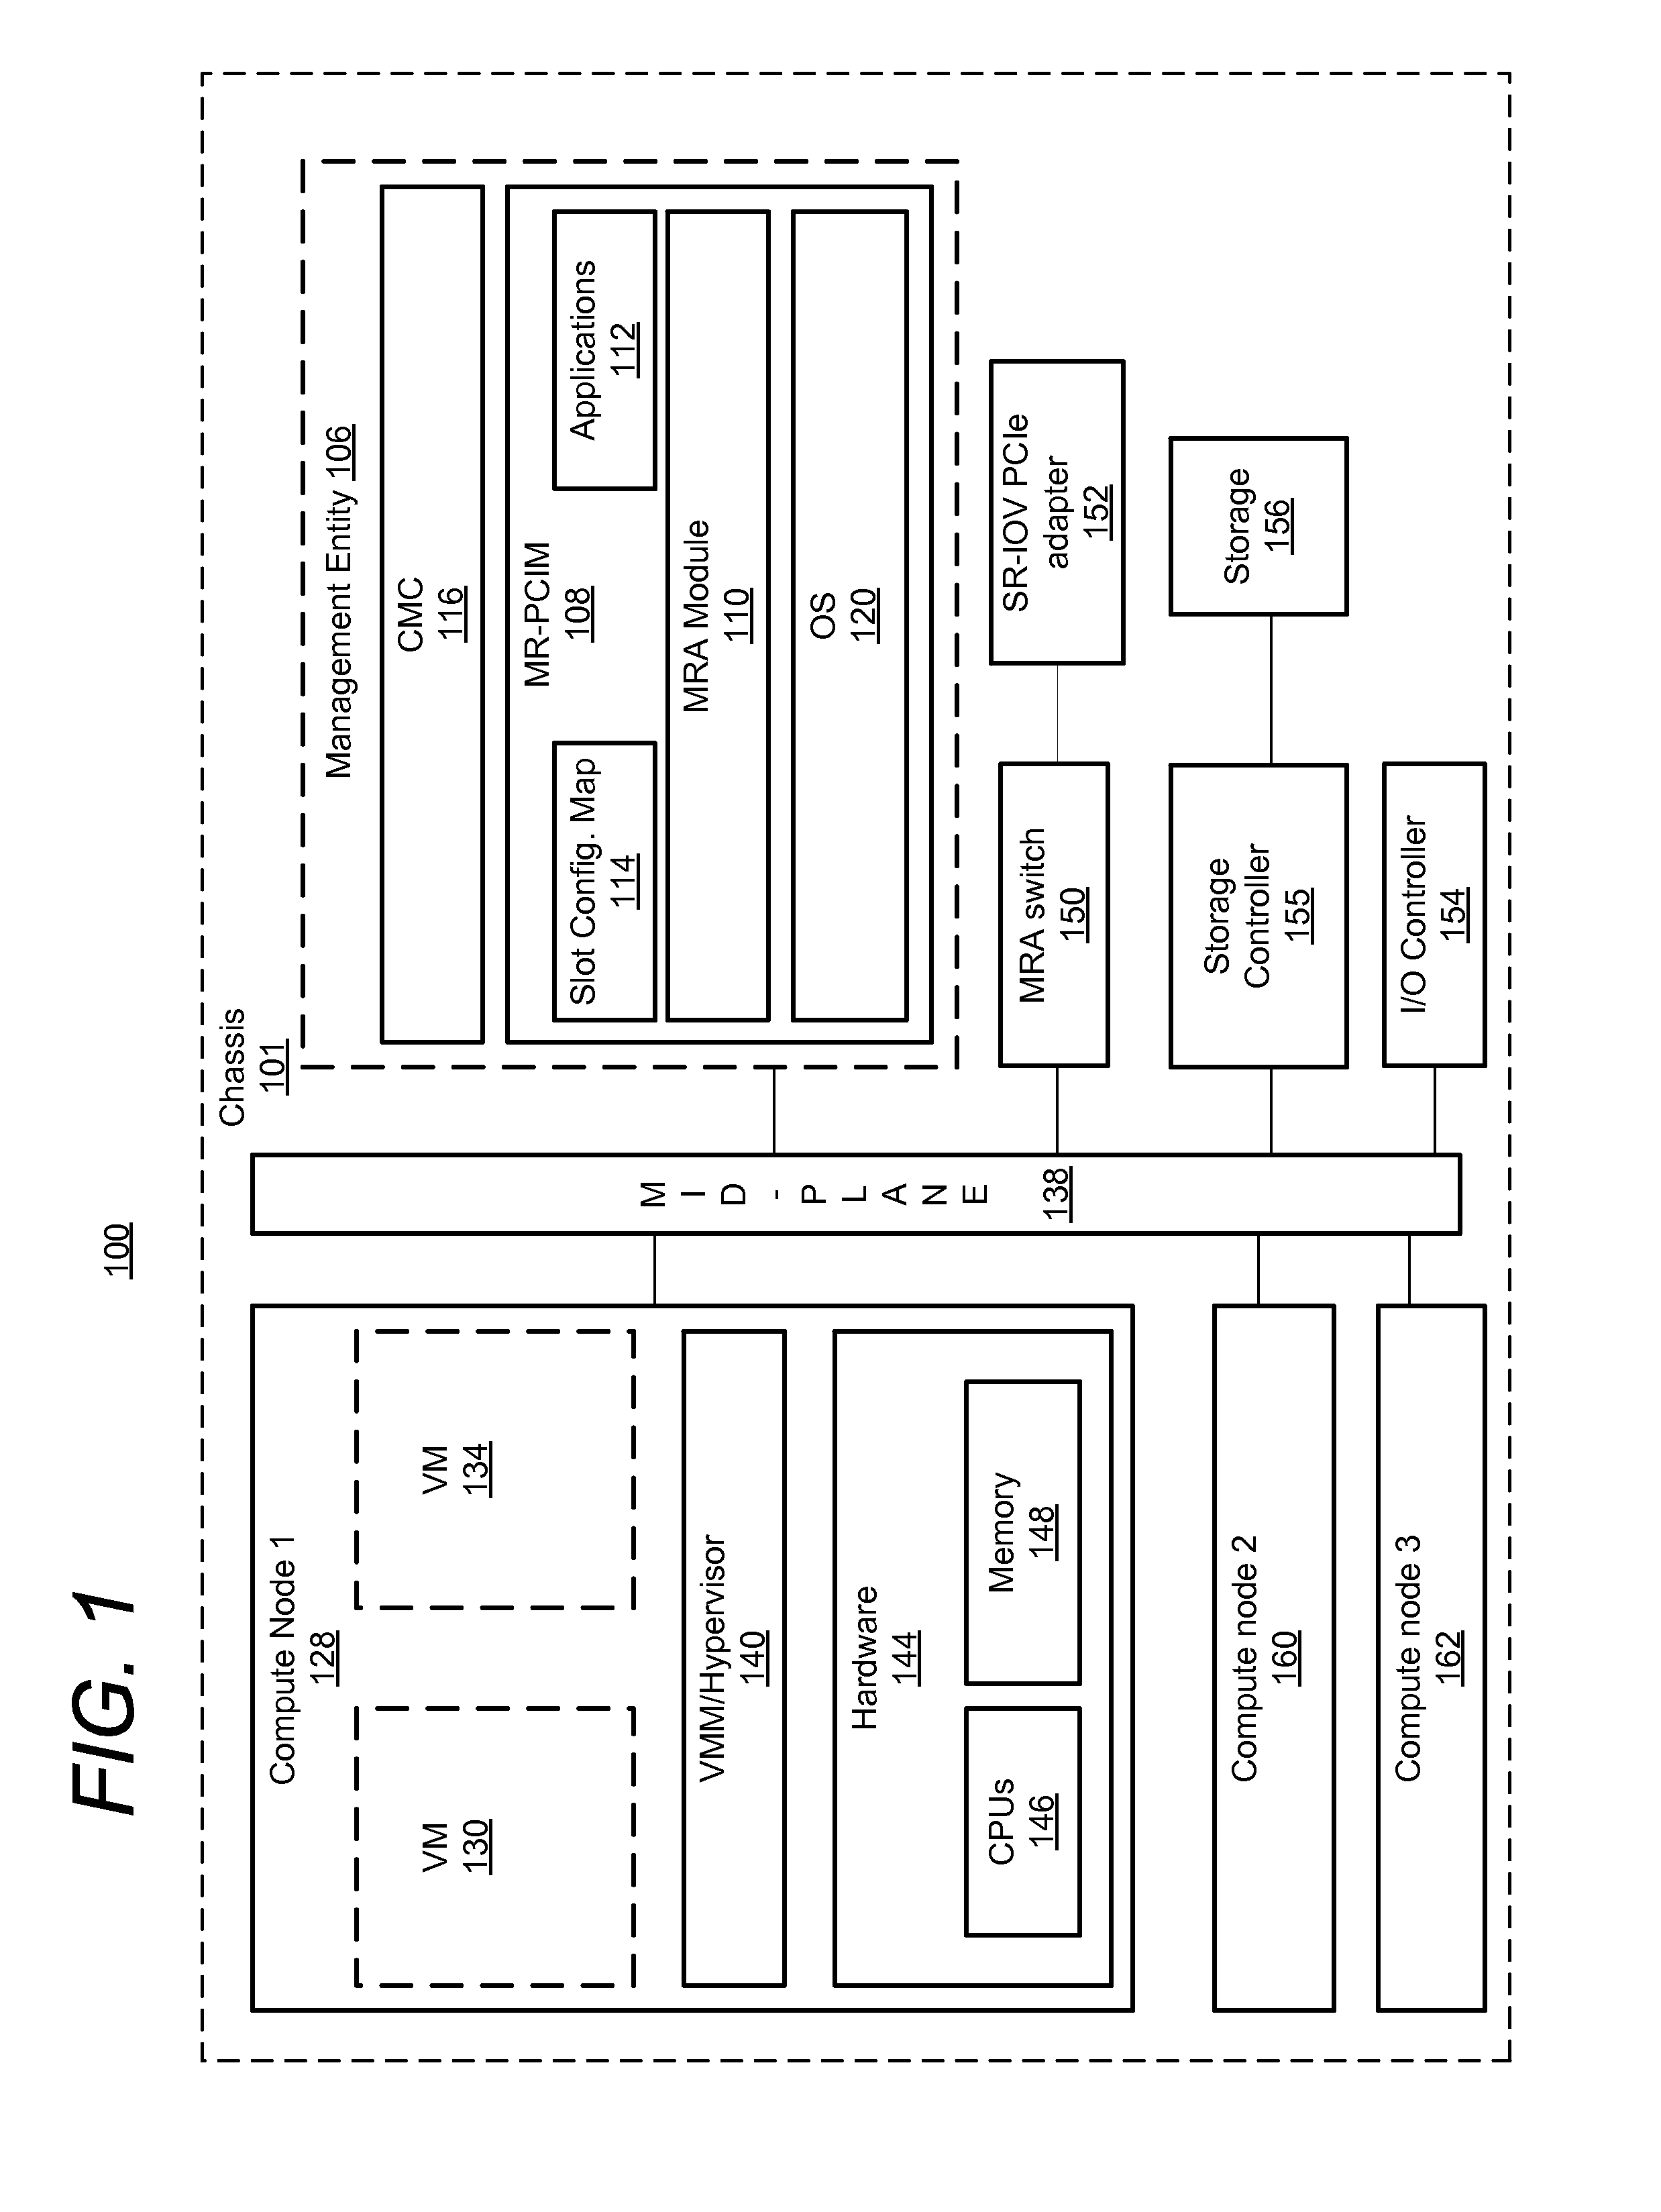 Method for dynamic configuration of a pcie slot device for single or multi root ability